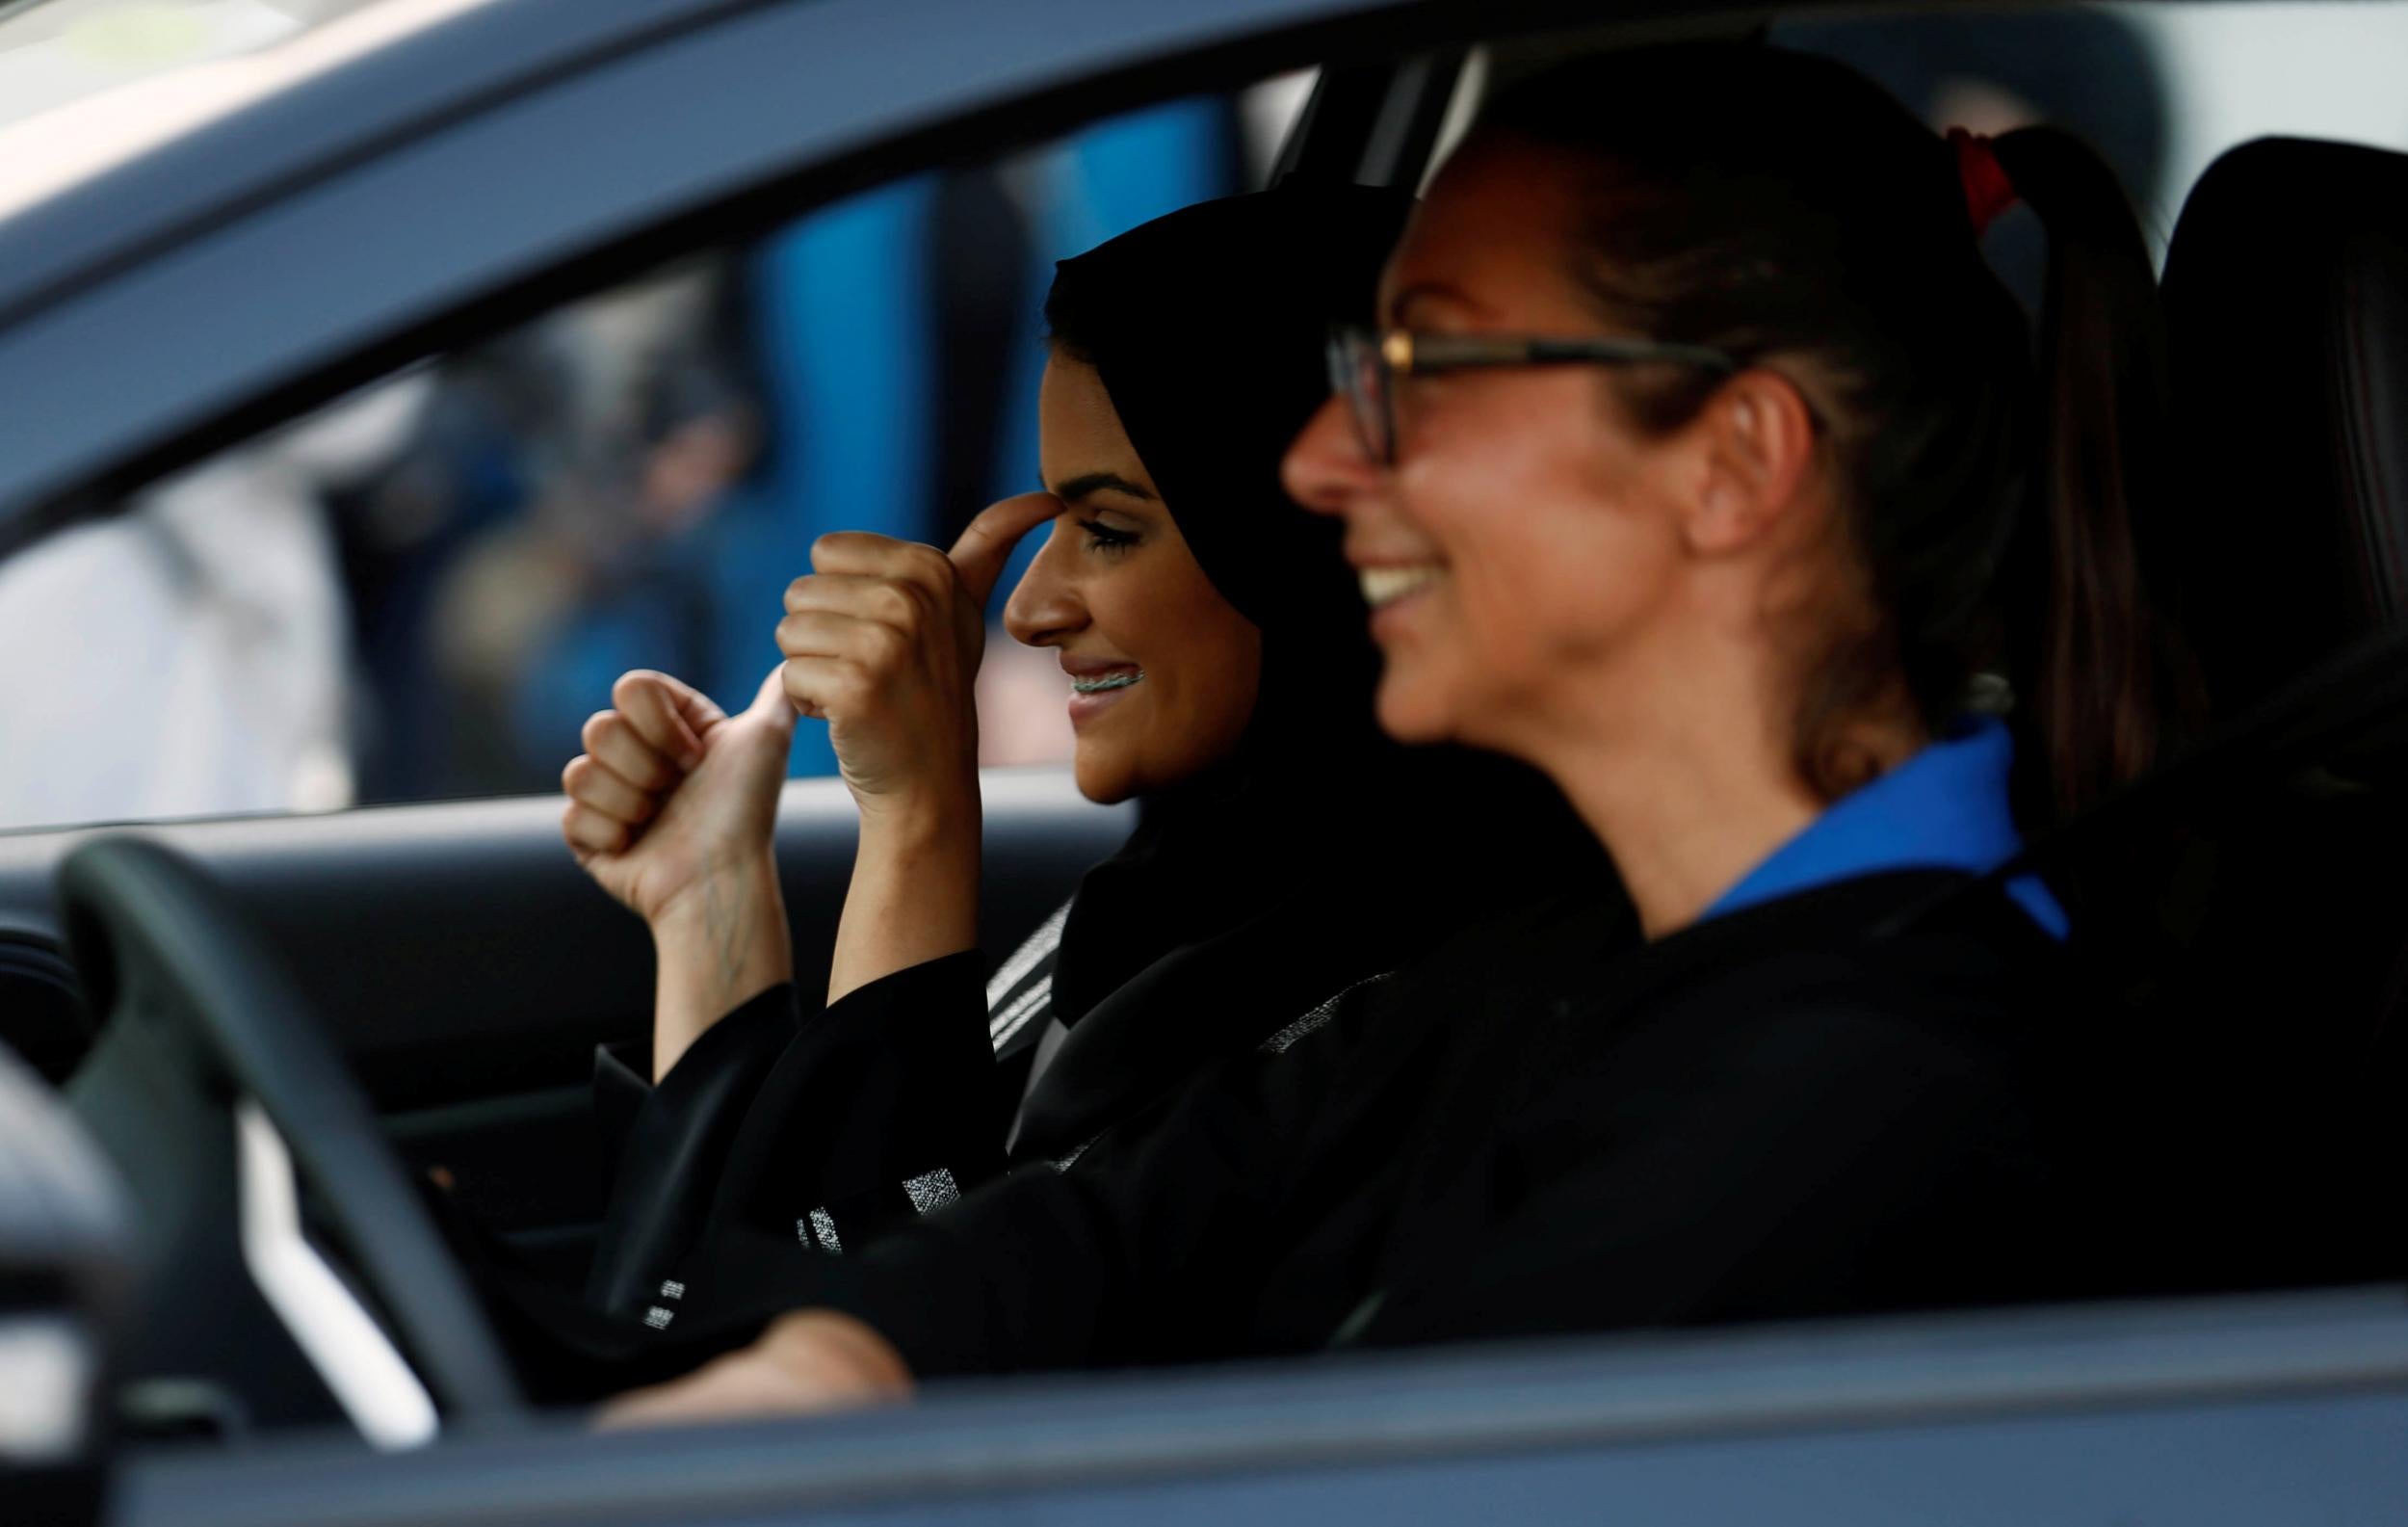 To prepare for the rule change on 24 June, women are already taking driving lessons in Jeddah